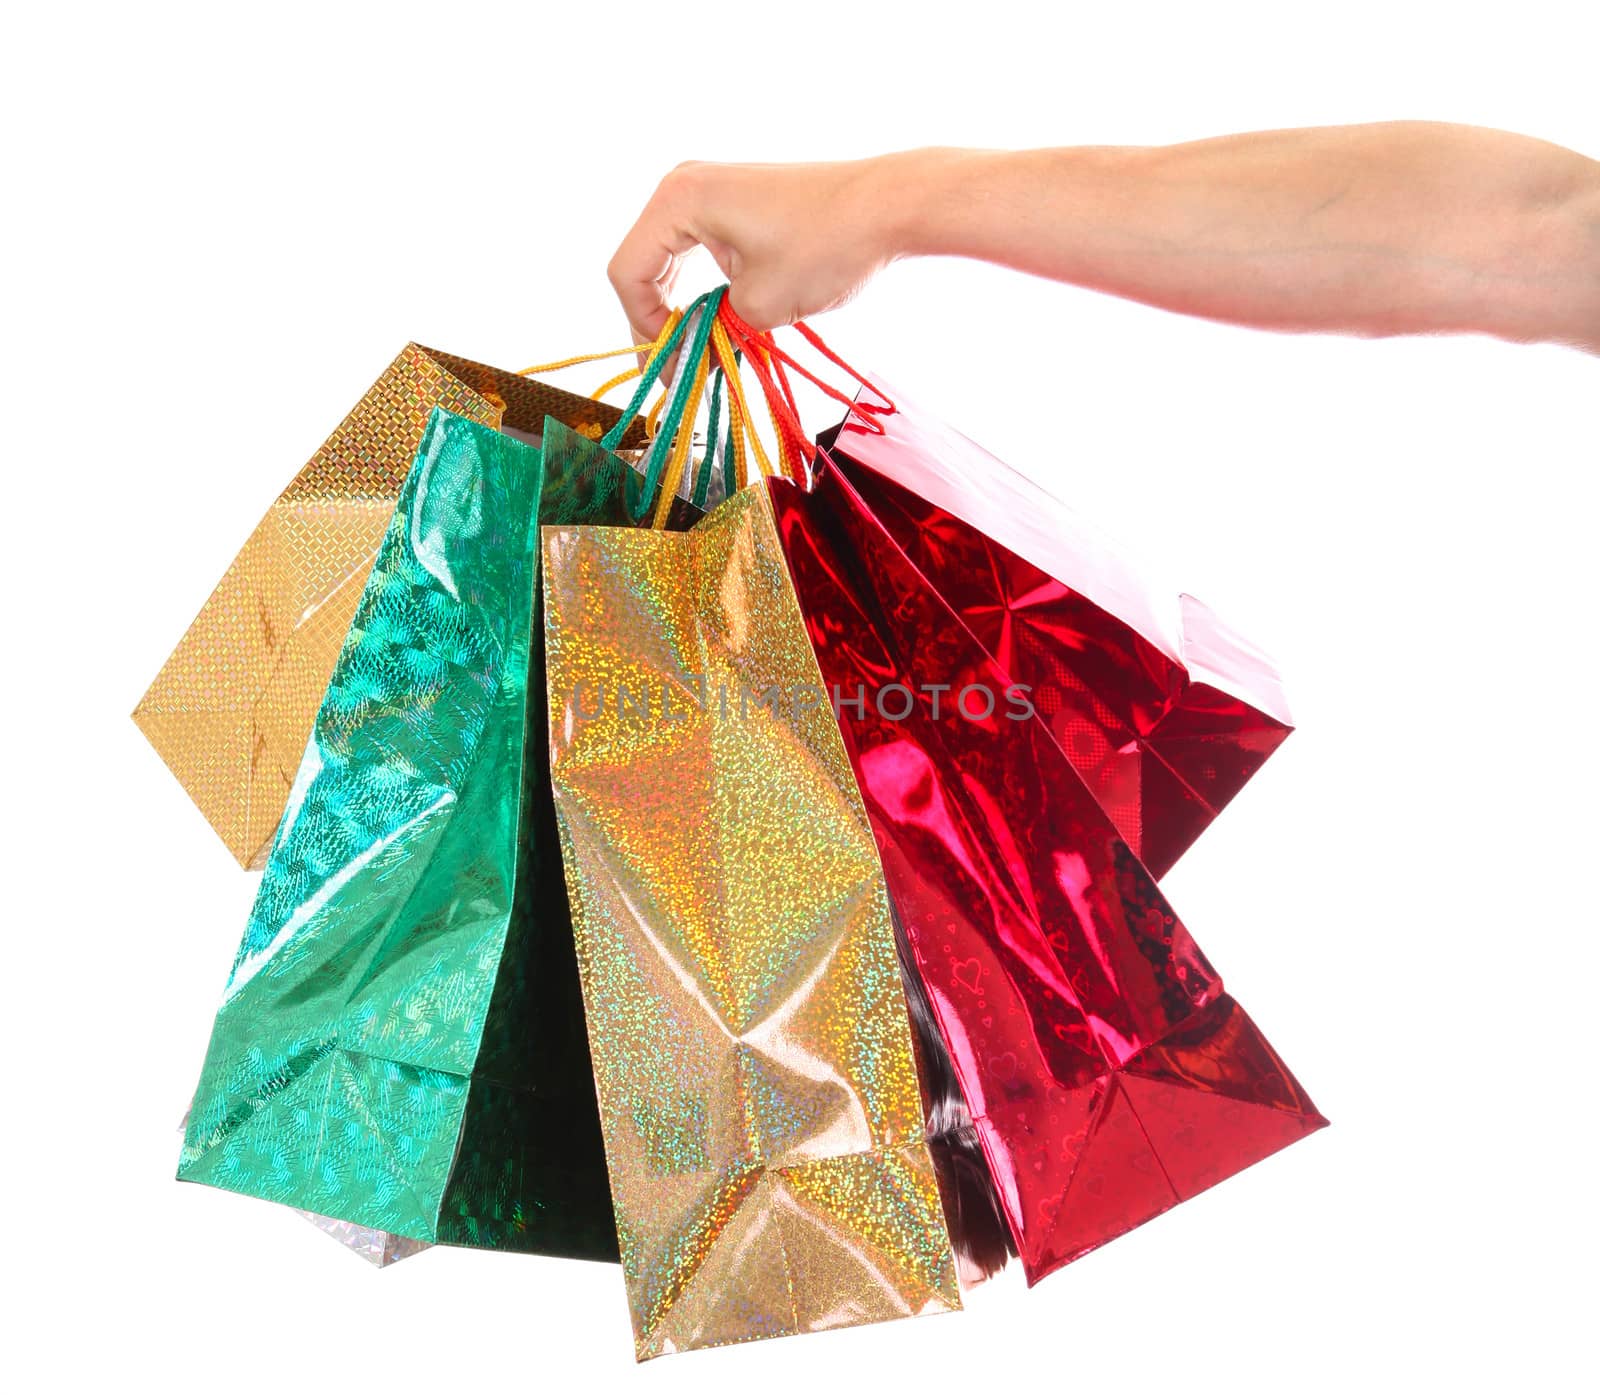 Shopping Bags in a Hand Closeup Isolated On The White Background